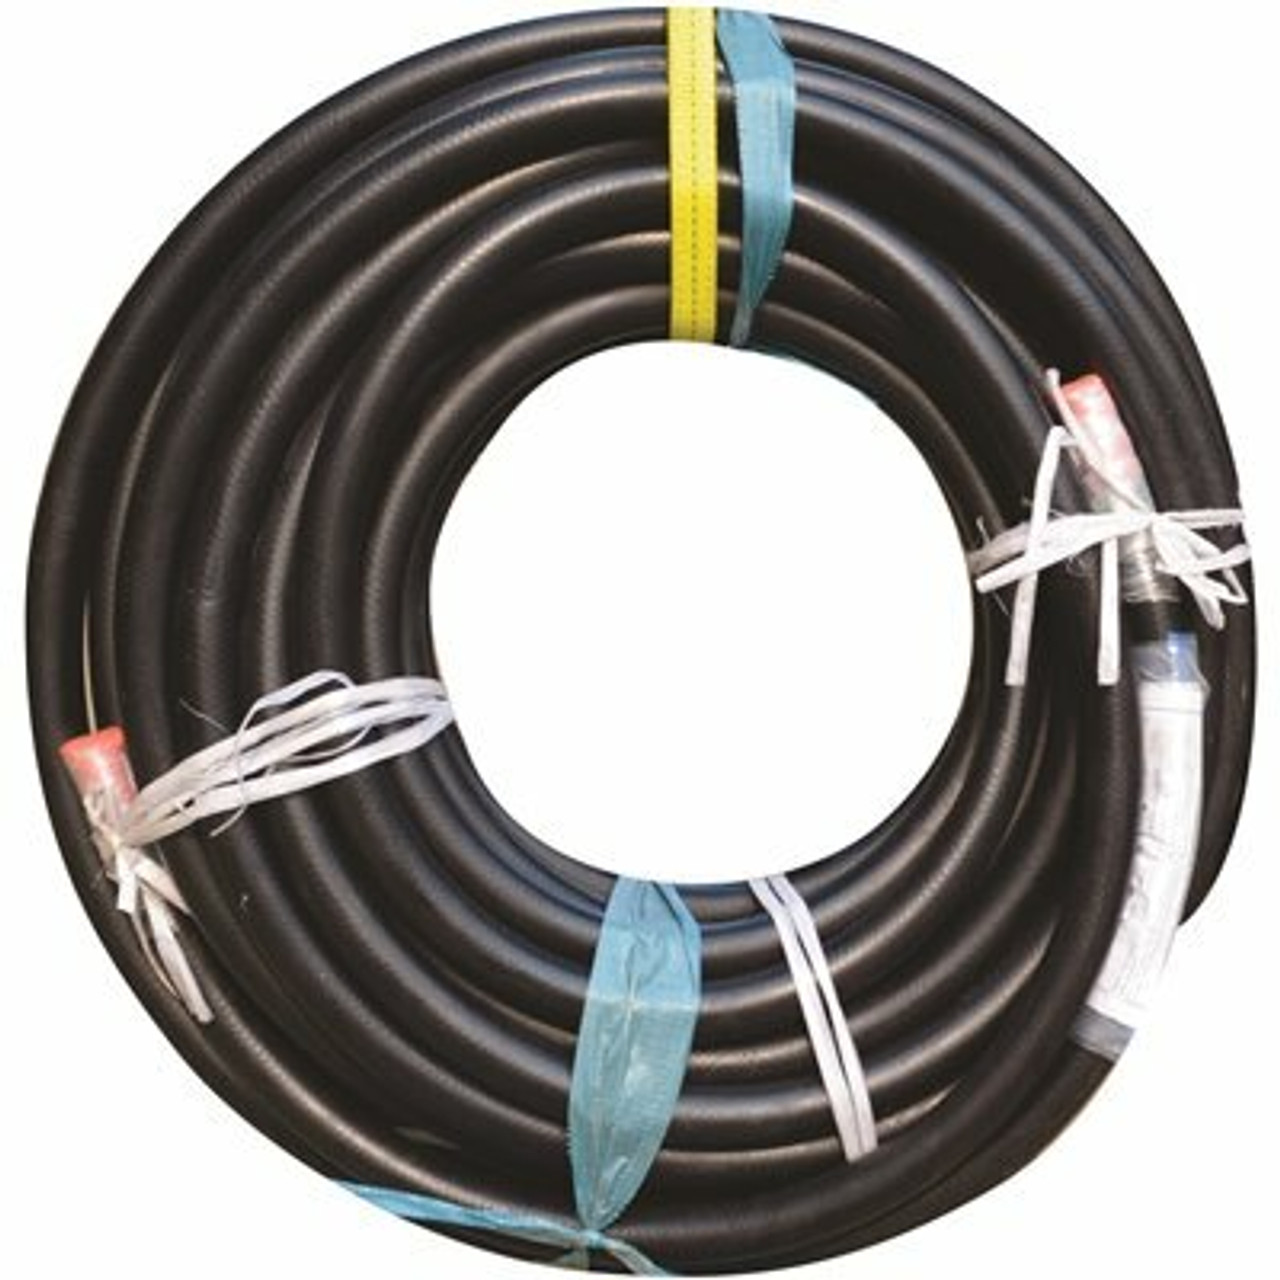 Enerco 1.25 In. X 150 Ft. High Pressure Liquid Propane Gas Rubber Hose Assembly With Mnpt X Mnpt Smooth Cover